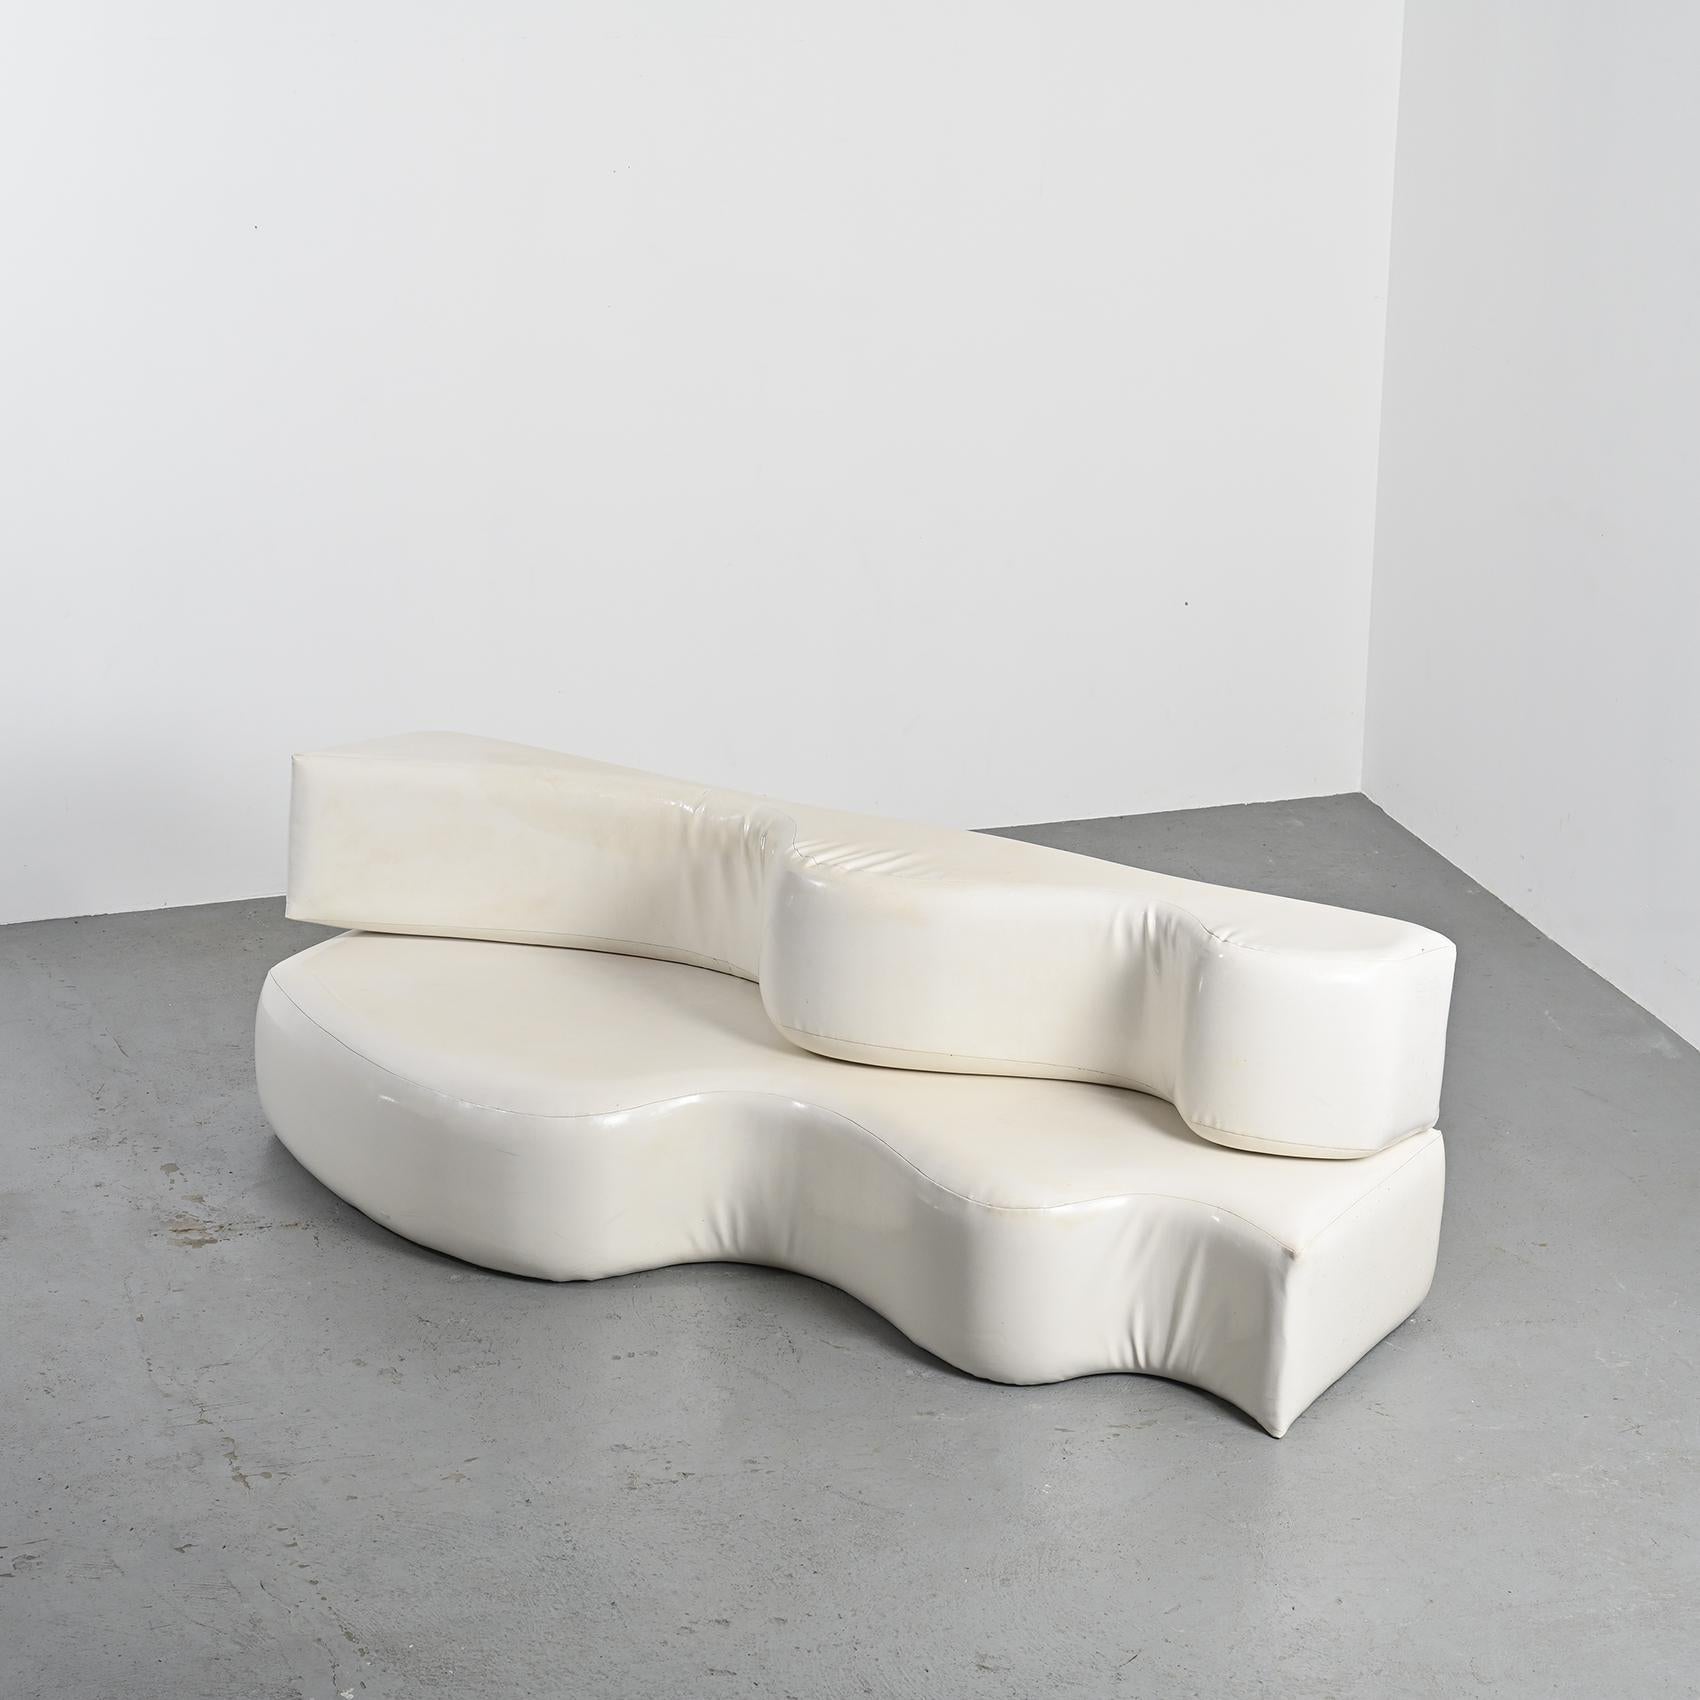 
The Superonda sofa by Poltronova, a result of collaboration with Archizoom Associati, stands as a quintessential emblem of Italian design. Conceived in 1967 by the radical Florentine collective Archizoom, this innovative sofa boldly breaks away